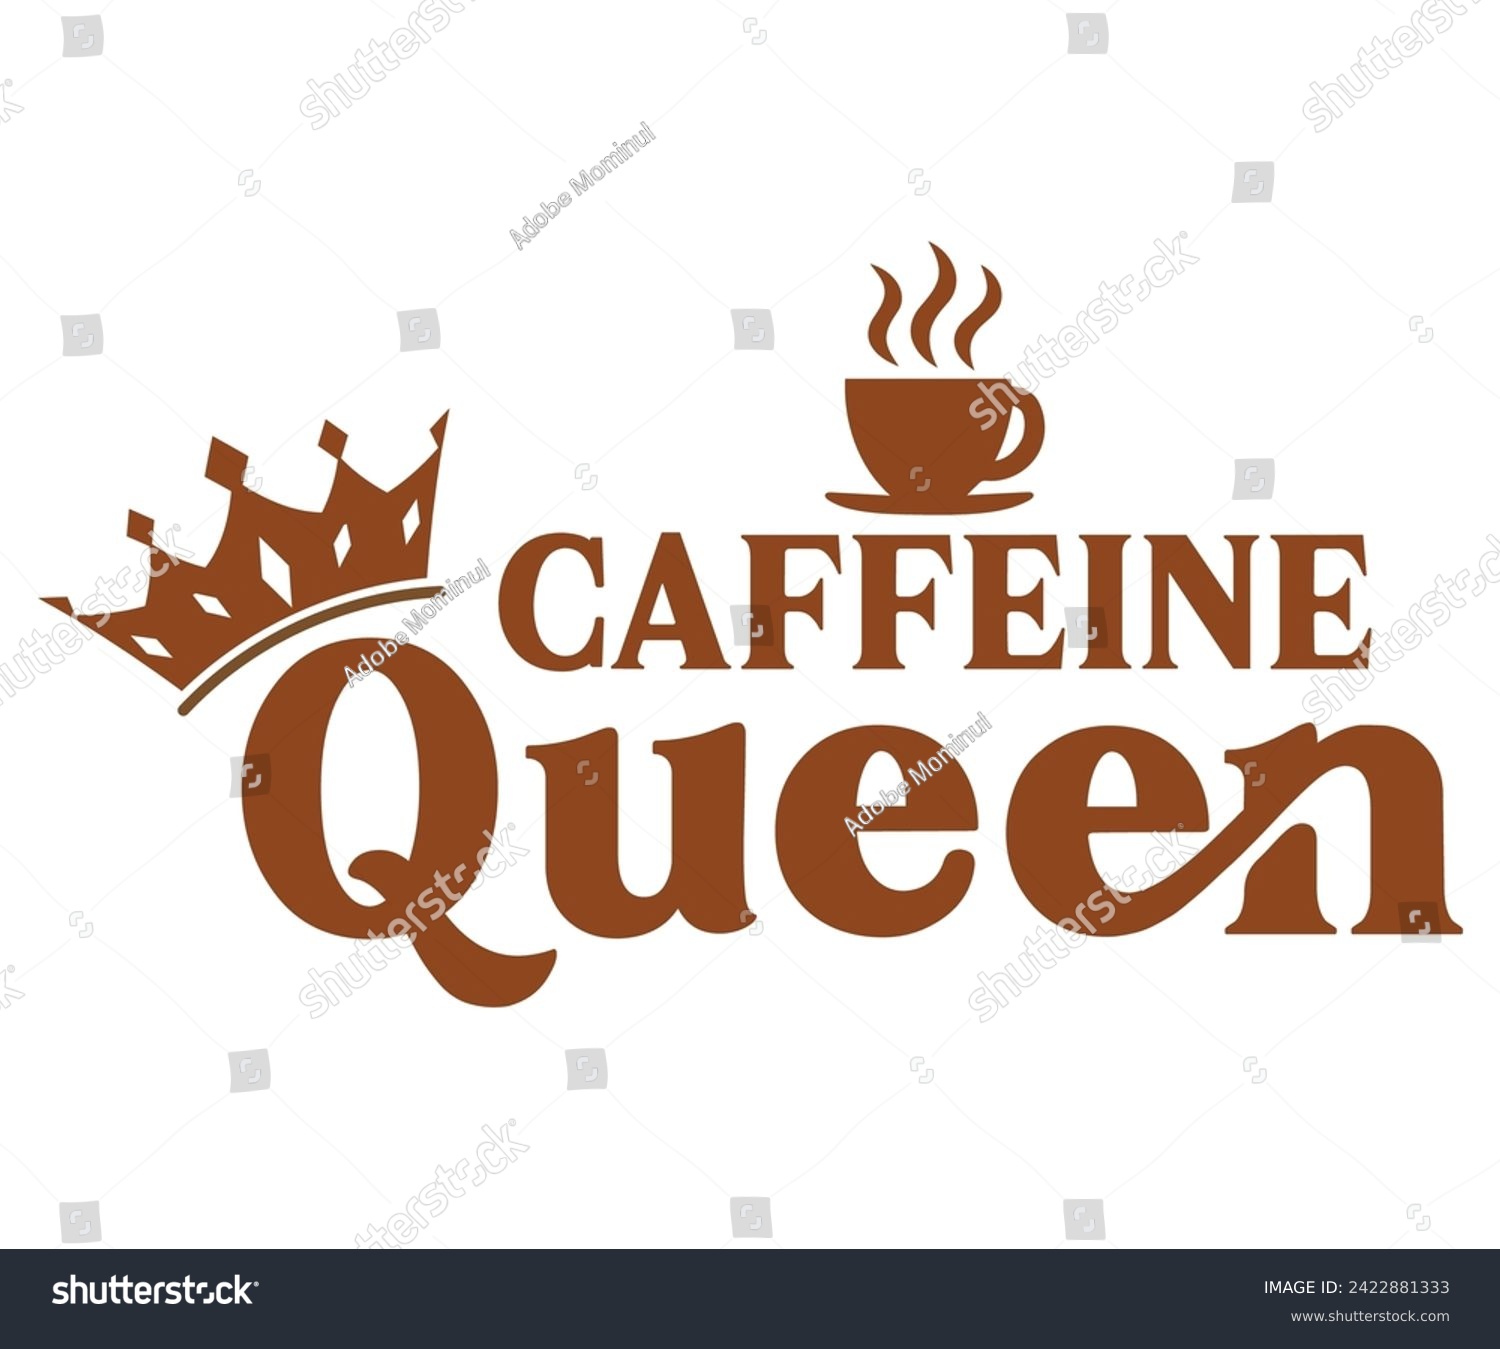 SVG of Caffeine Queen Svg,Coffee Svg,Coffee Retro,Funny Coffee Sayings,Coffee Mug Svg,Coffee Cup Svg,Gift For Coffee,Coffee Lover,Caffeine Svg,Svg Cut File,Coffee Quotes,Sublimation Design, svg